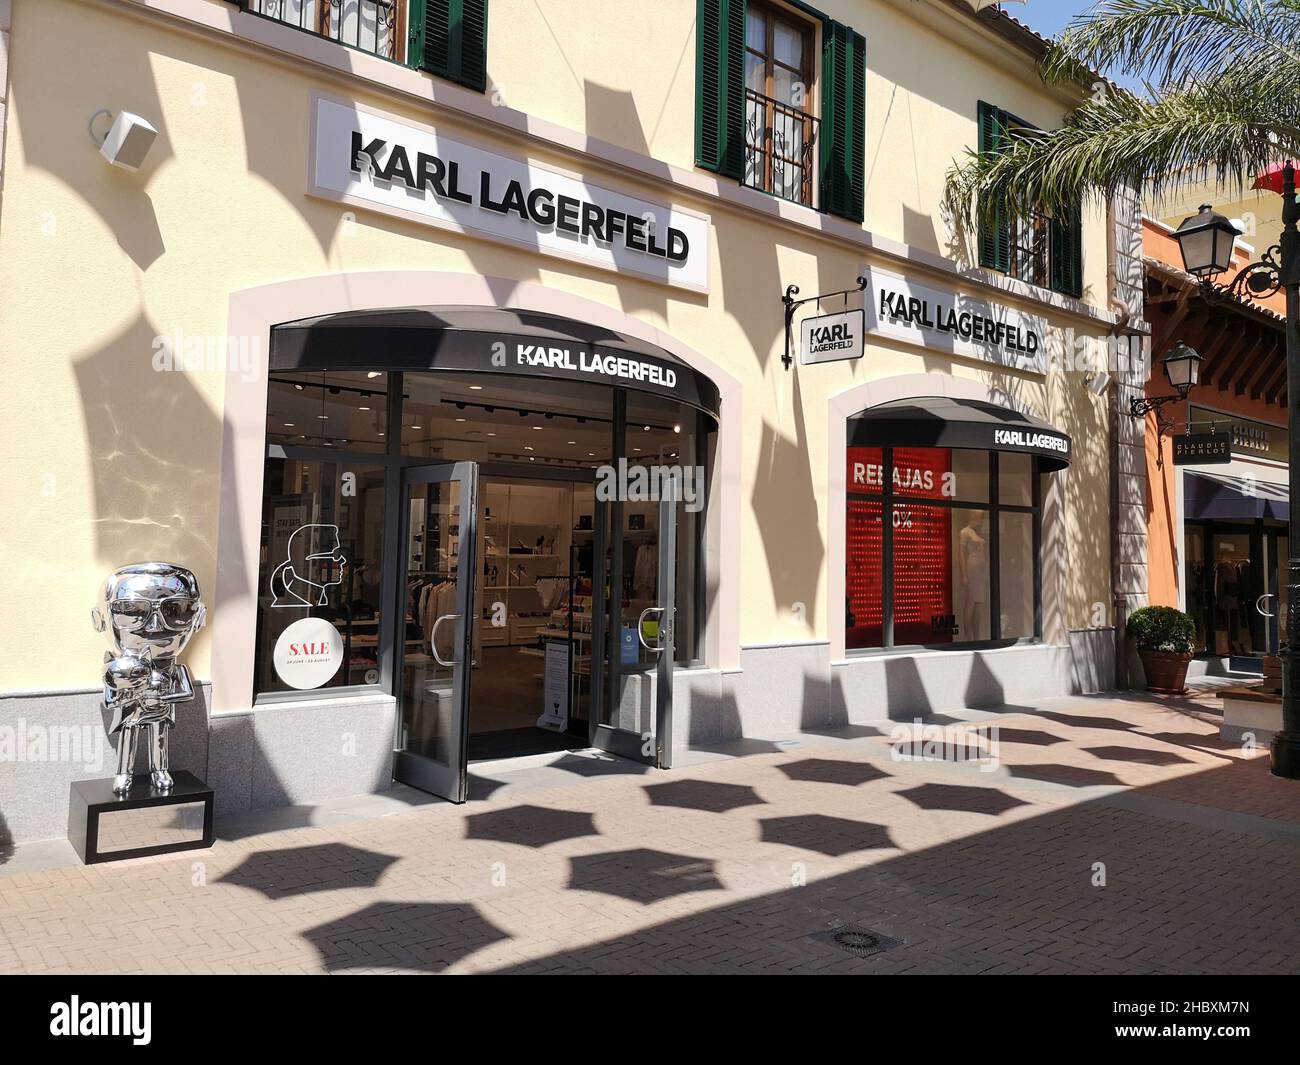 Karl Lagerfeld Store High Resolution Stock Photography and Images - Alamy